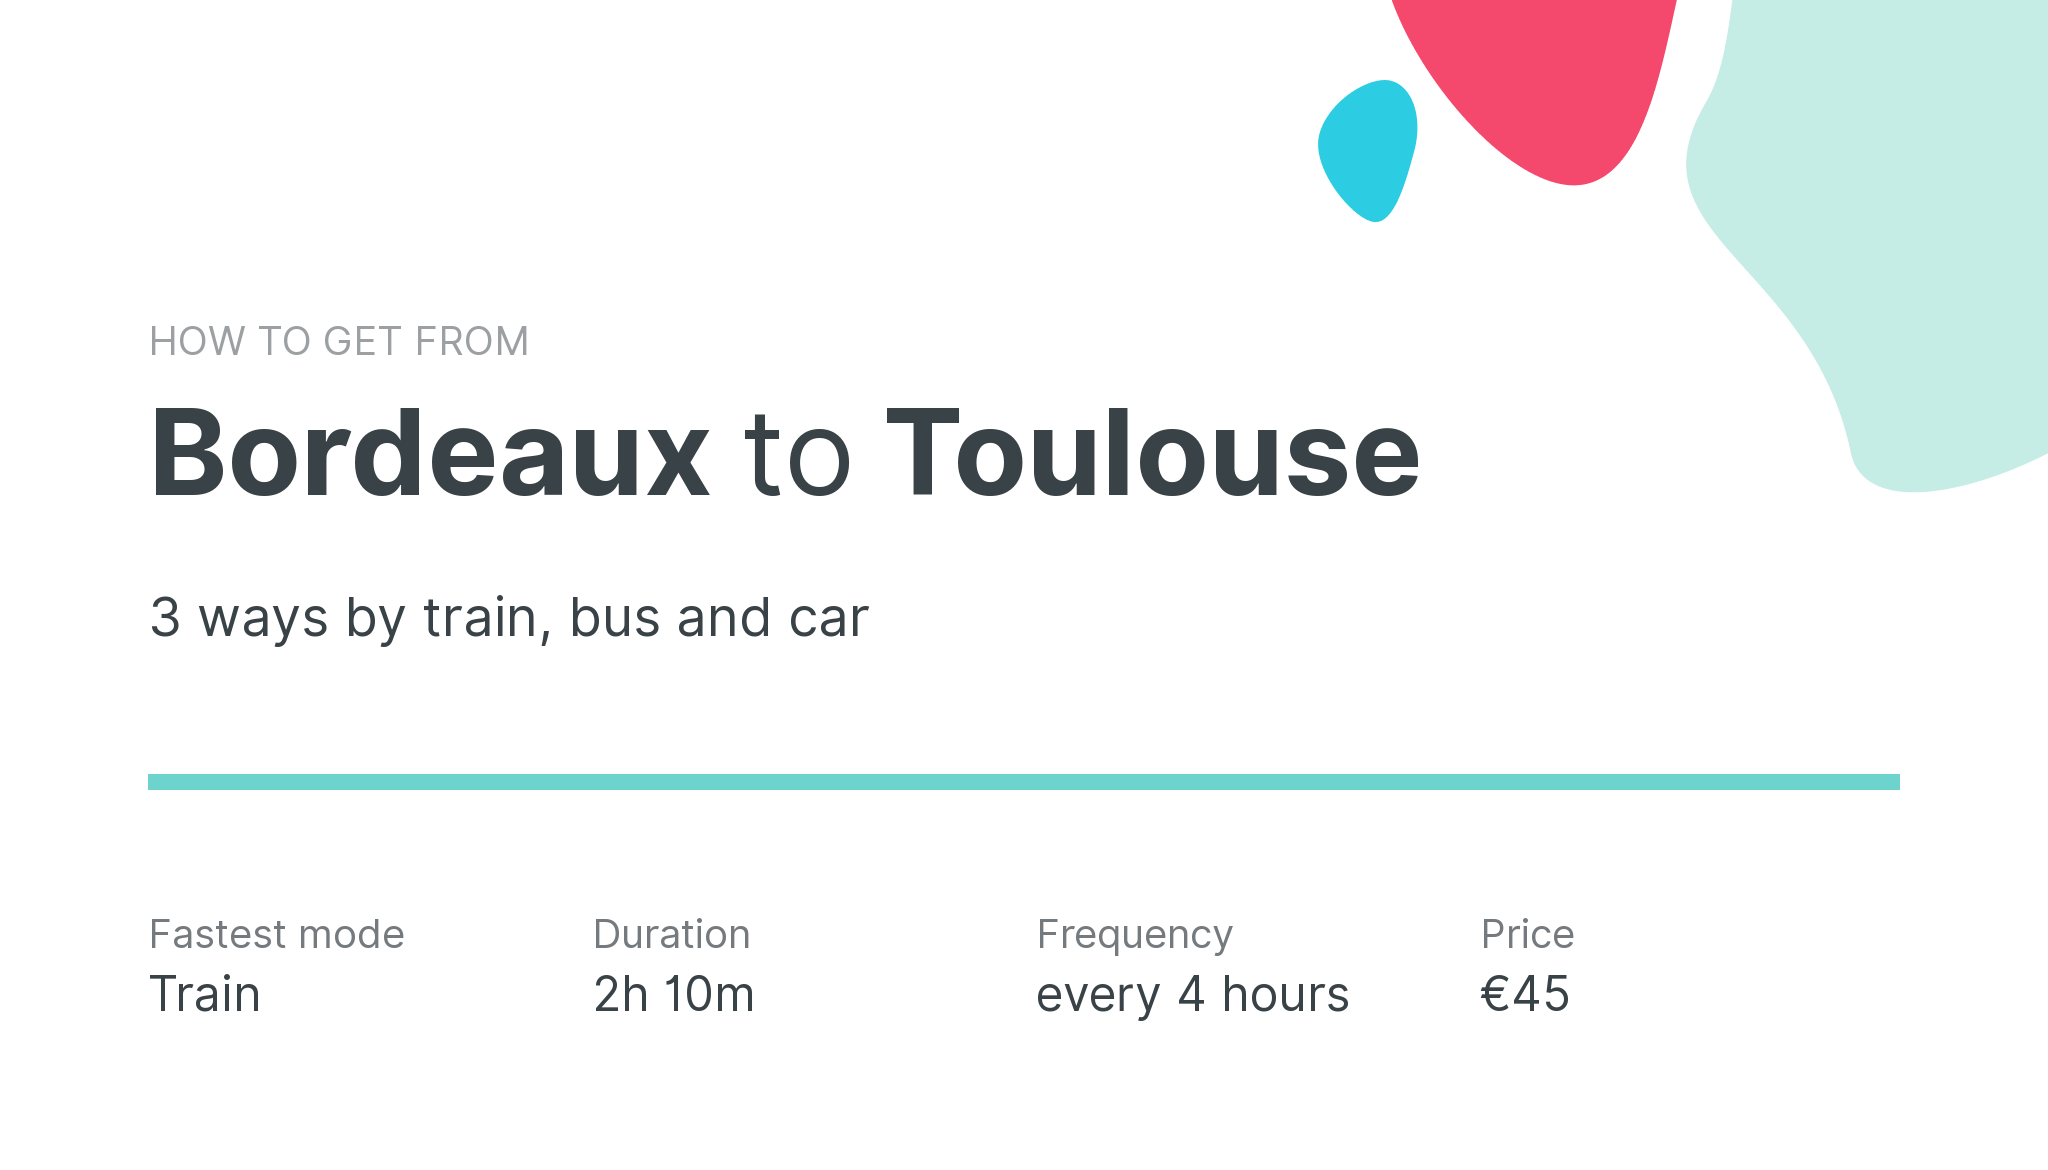 How do I get from Bordeaux to Toulouse